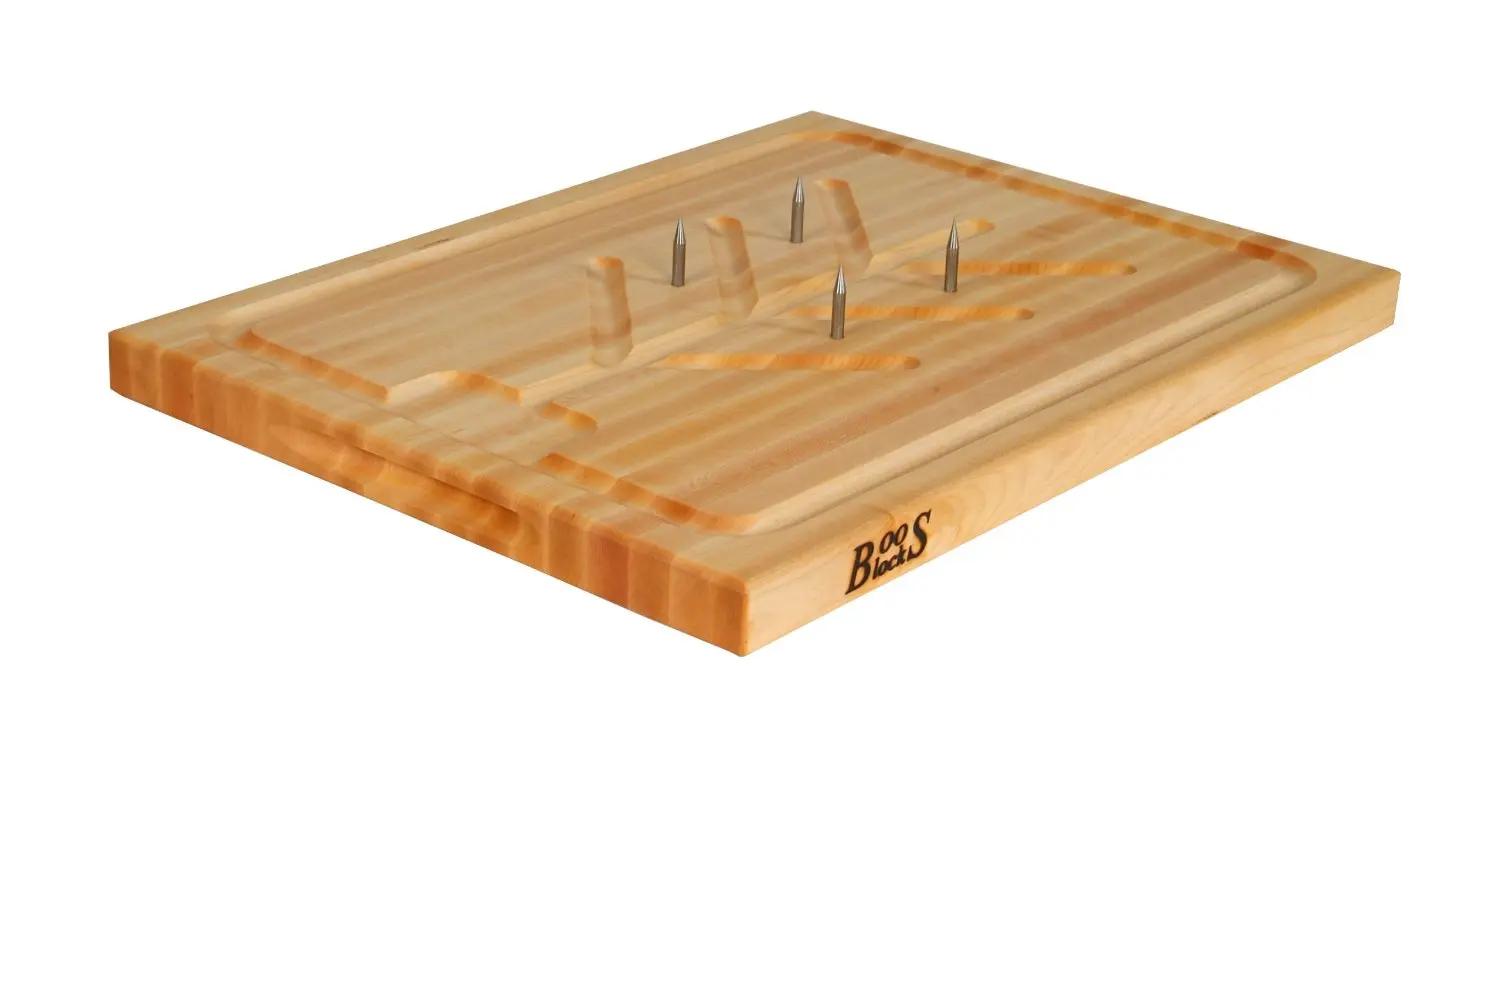 Finding board. Wood Blocks разделочная доска торцевая. Best Cutting Boards Boos. Board for Spikes.